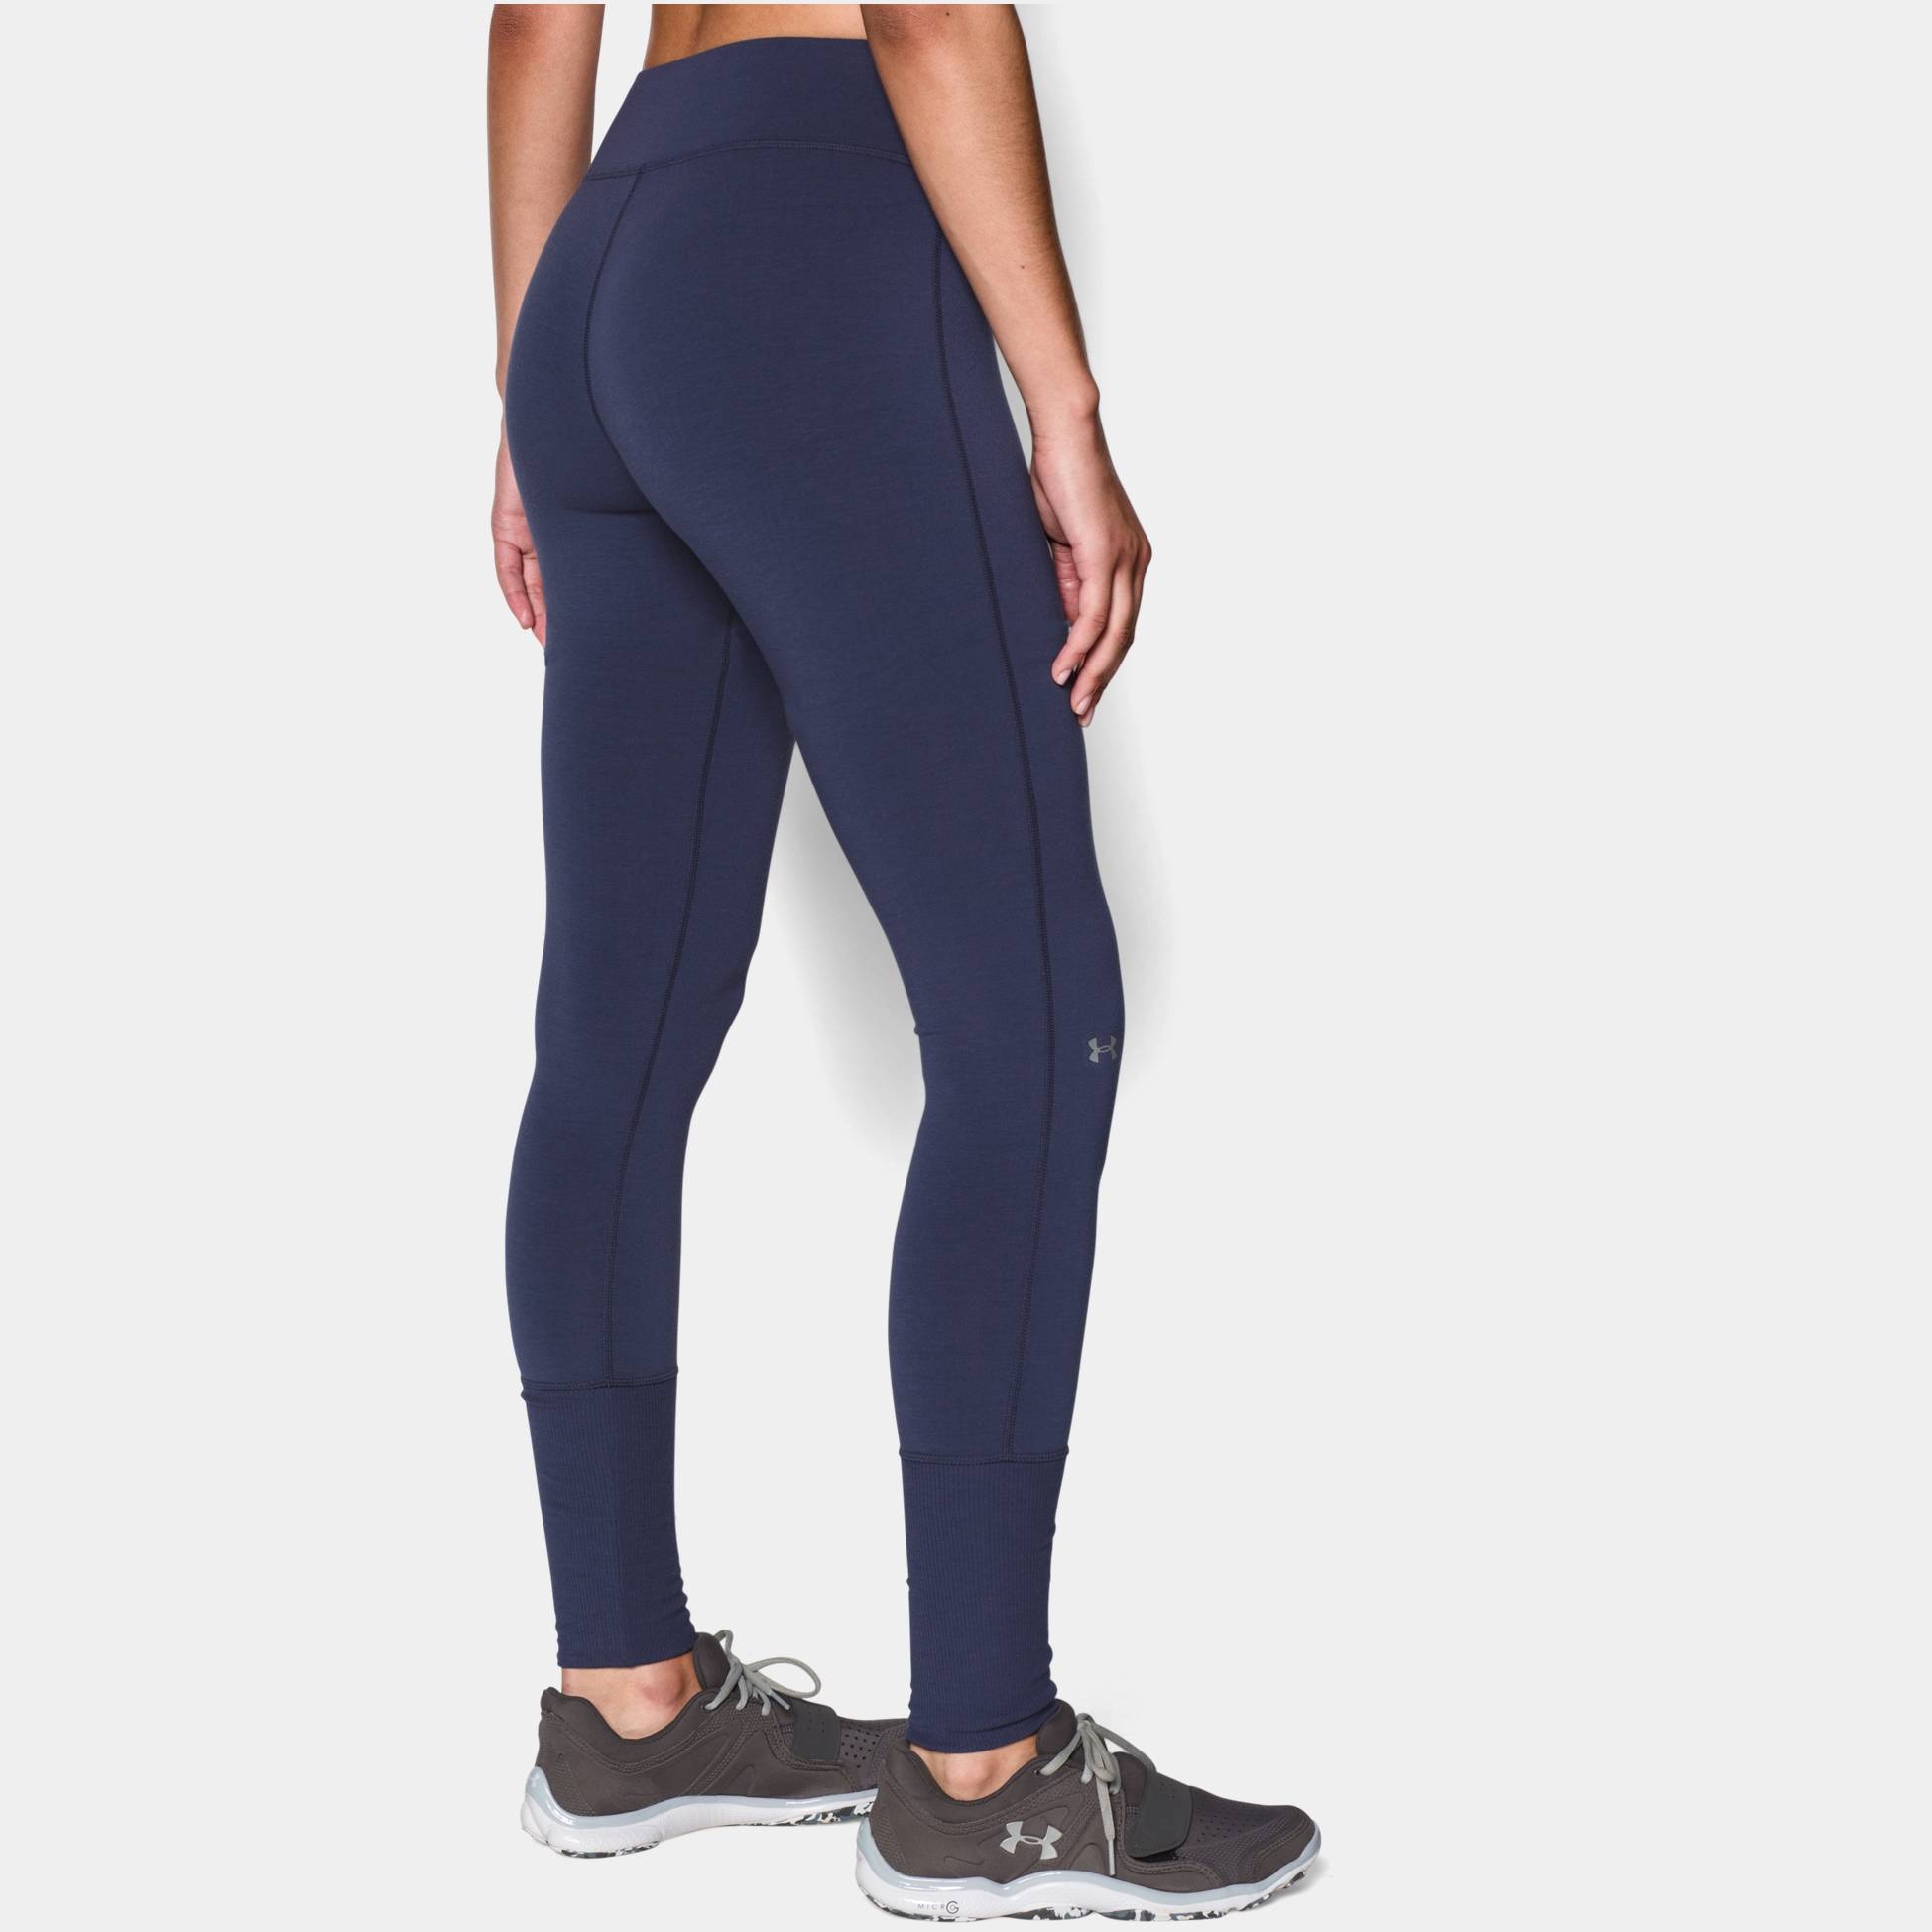  -  under armour Cold Gear Infrared Legging